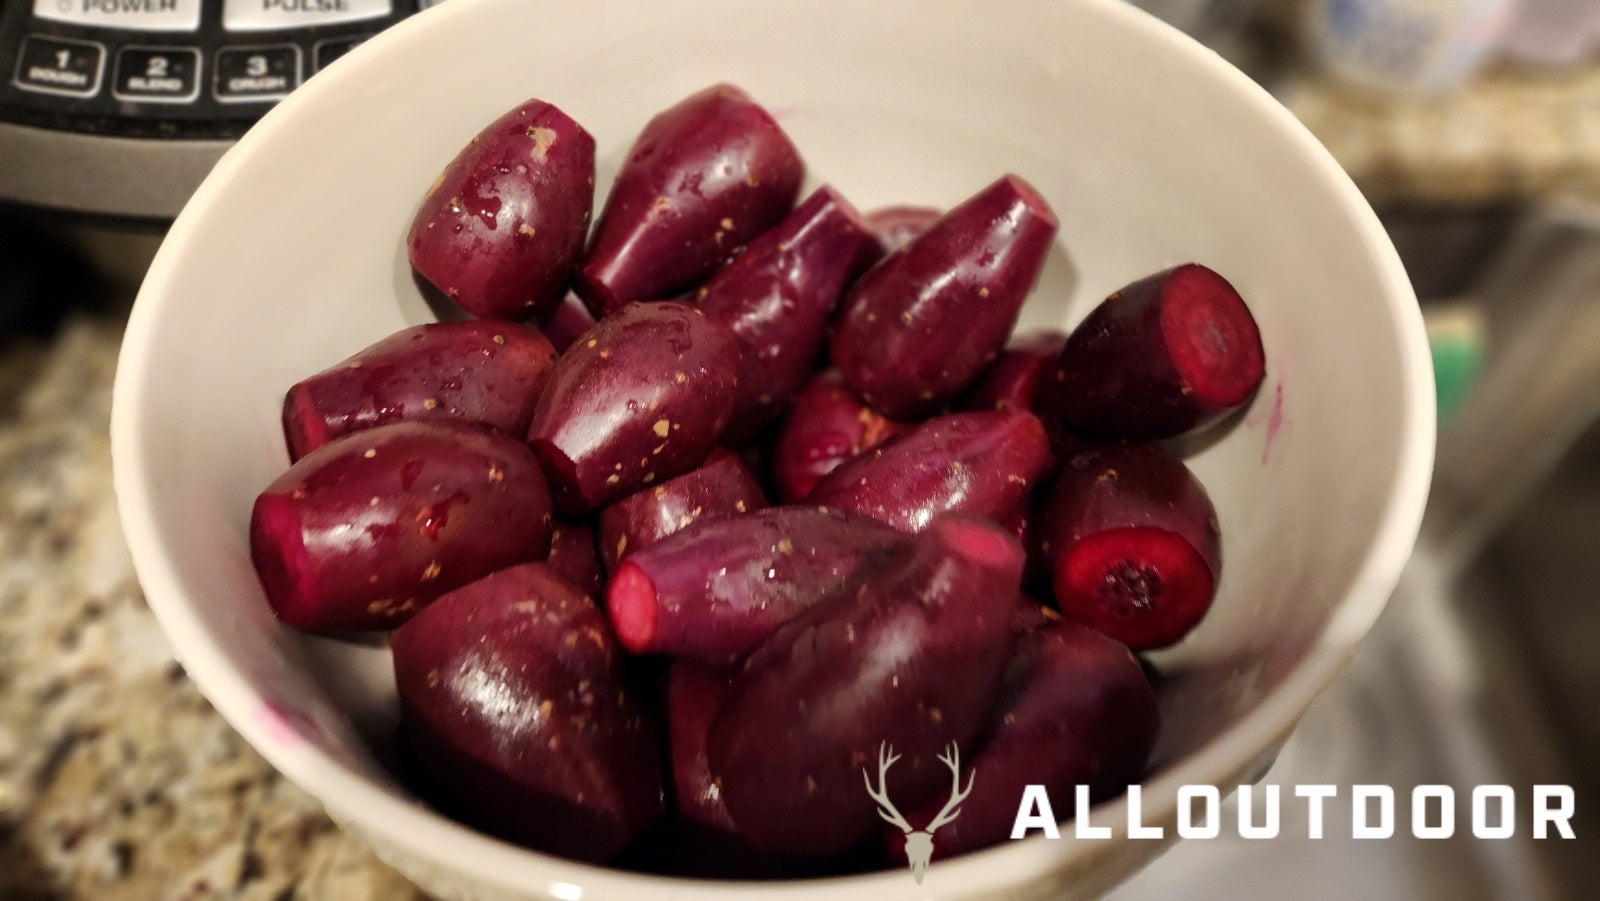 Surf n' Turf Topper - How to Make your Own Prickly Pears into Jelly!